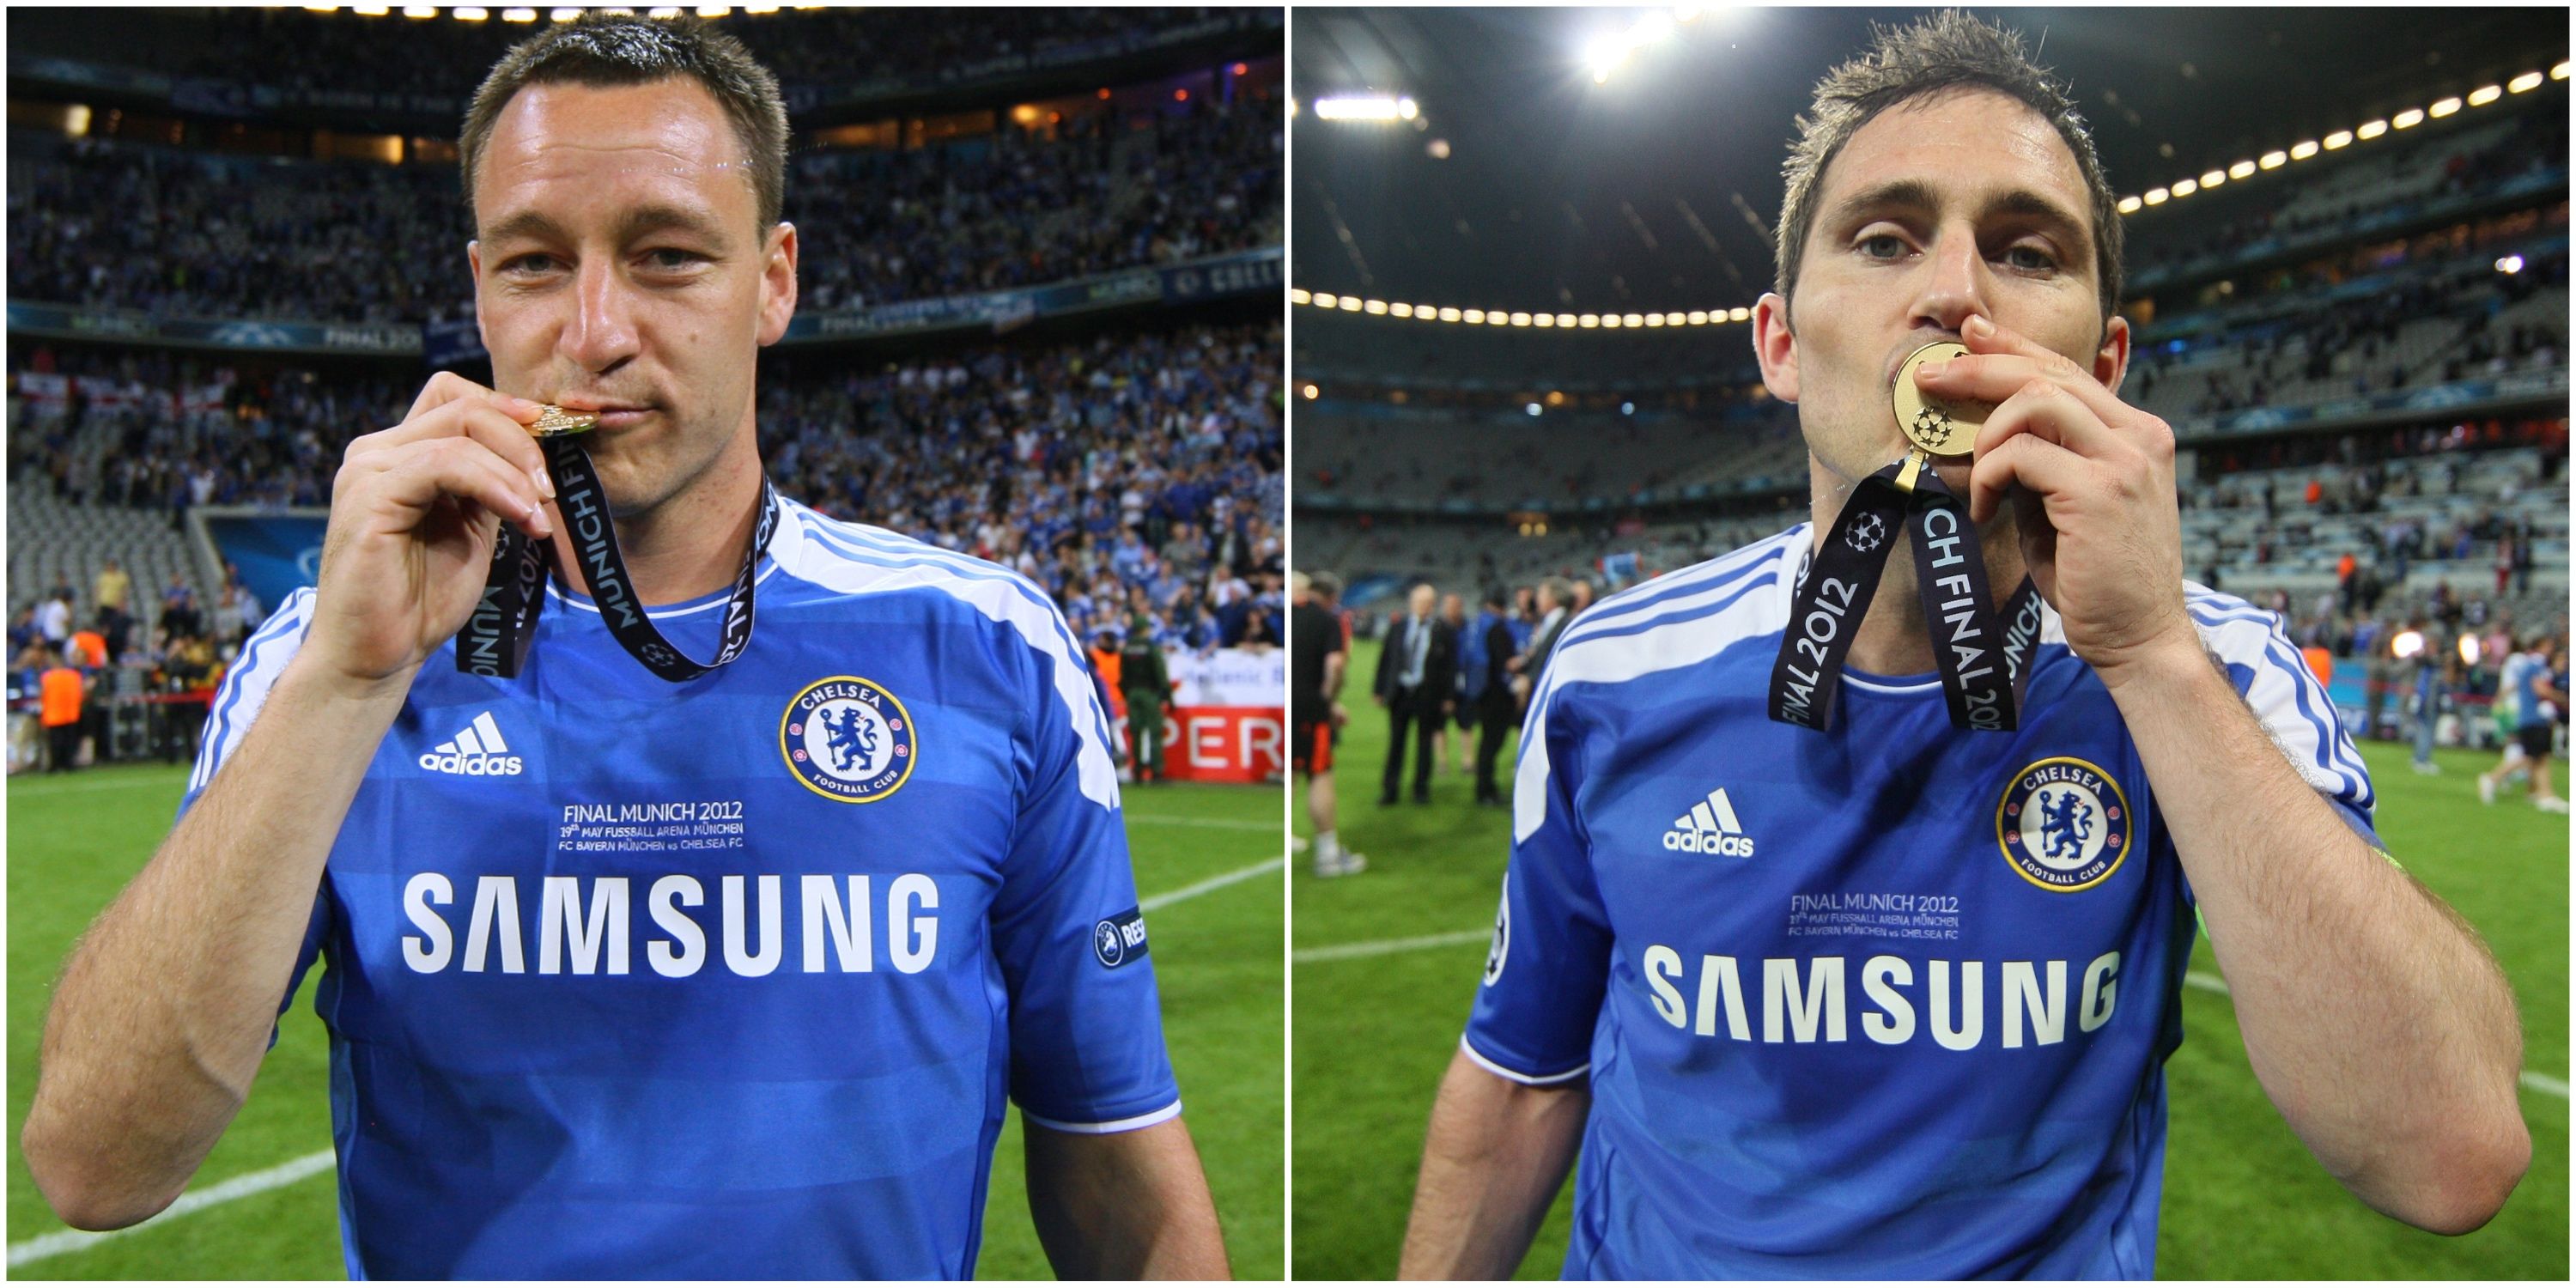 Chelsea: Frank Lampard’s defence of John Terry for wearing full kit in Munich